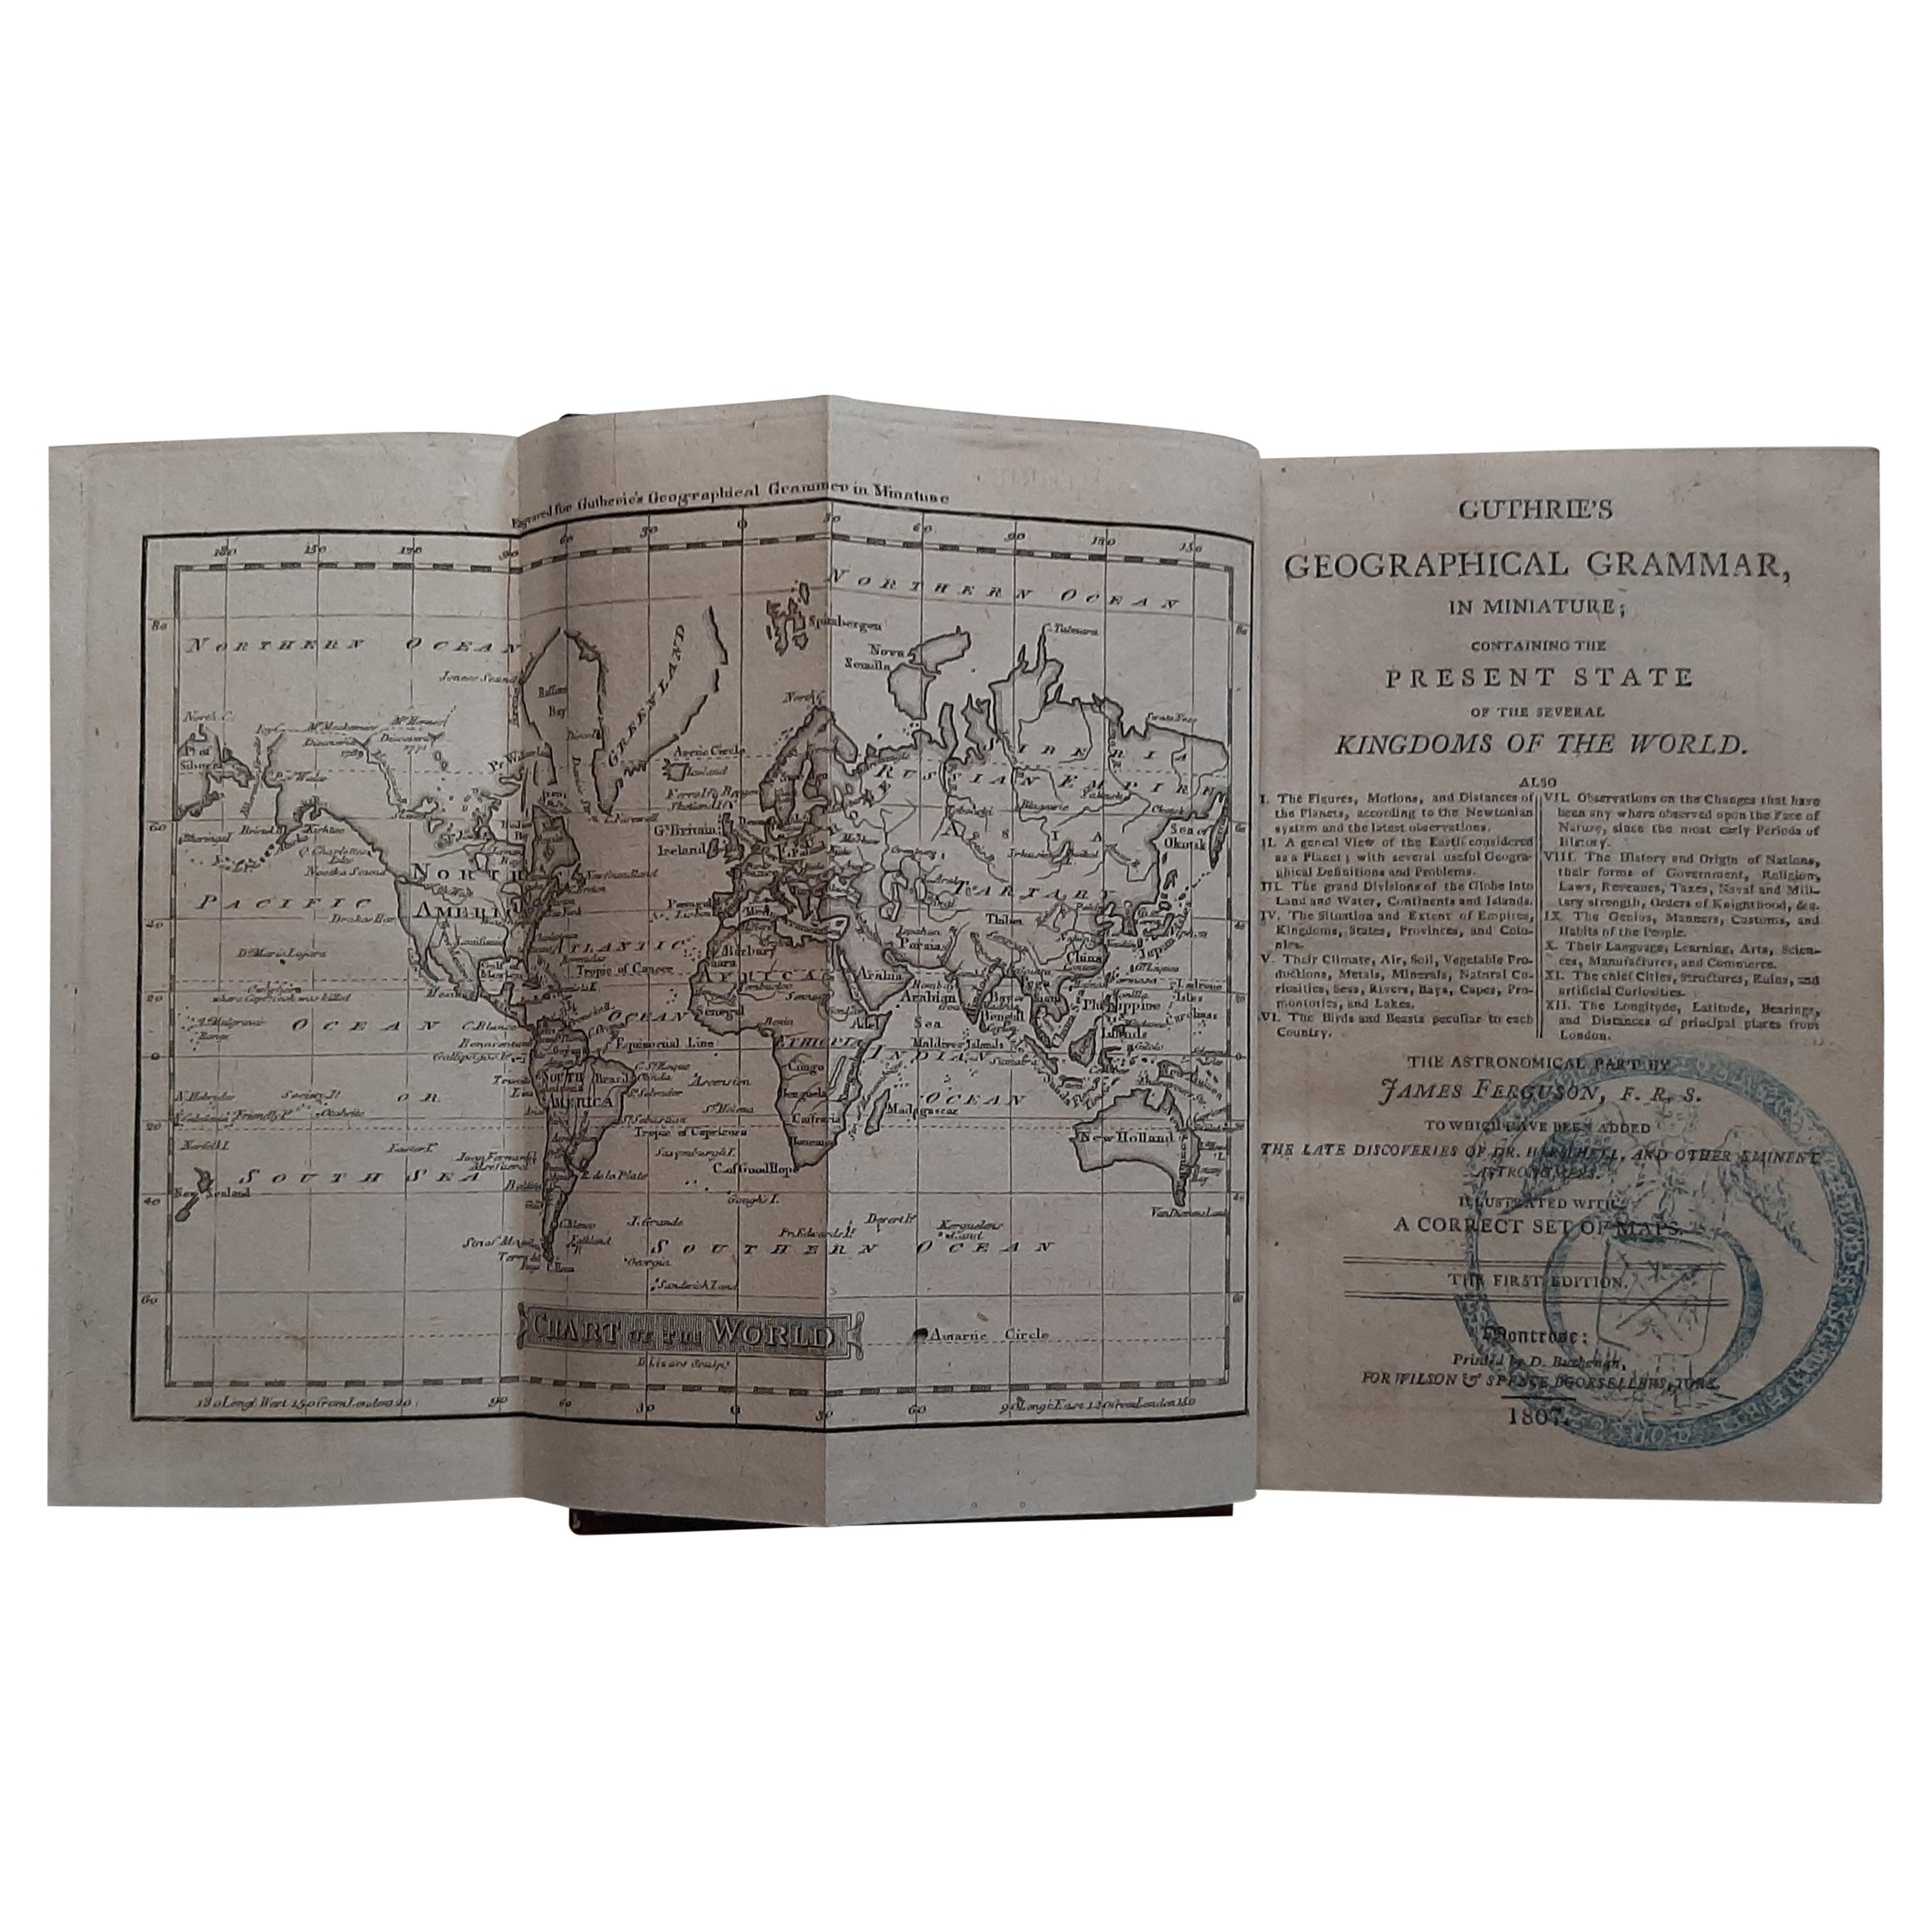 First Edition Guthrie's Geographical Grammmar in Miniature, 1807